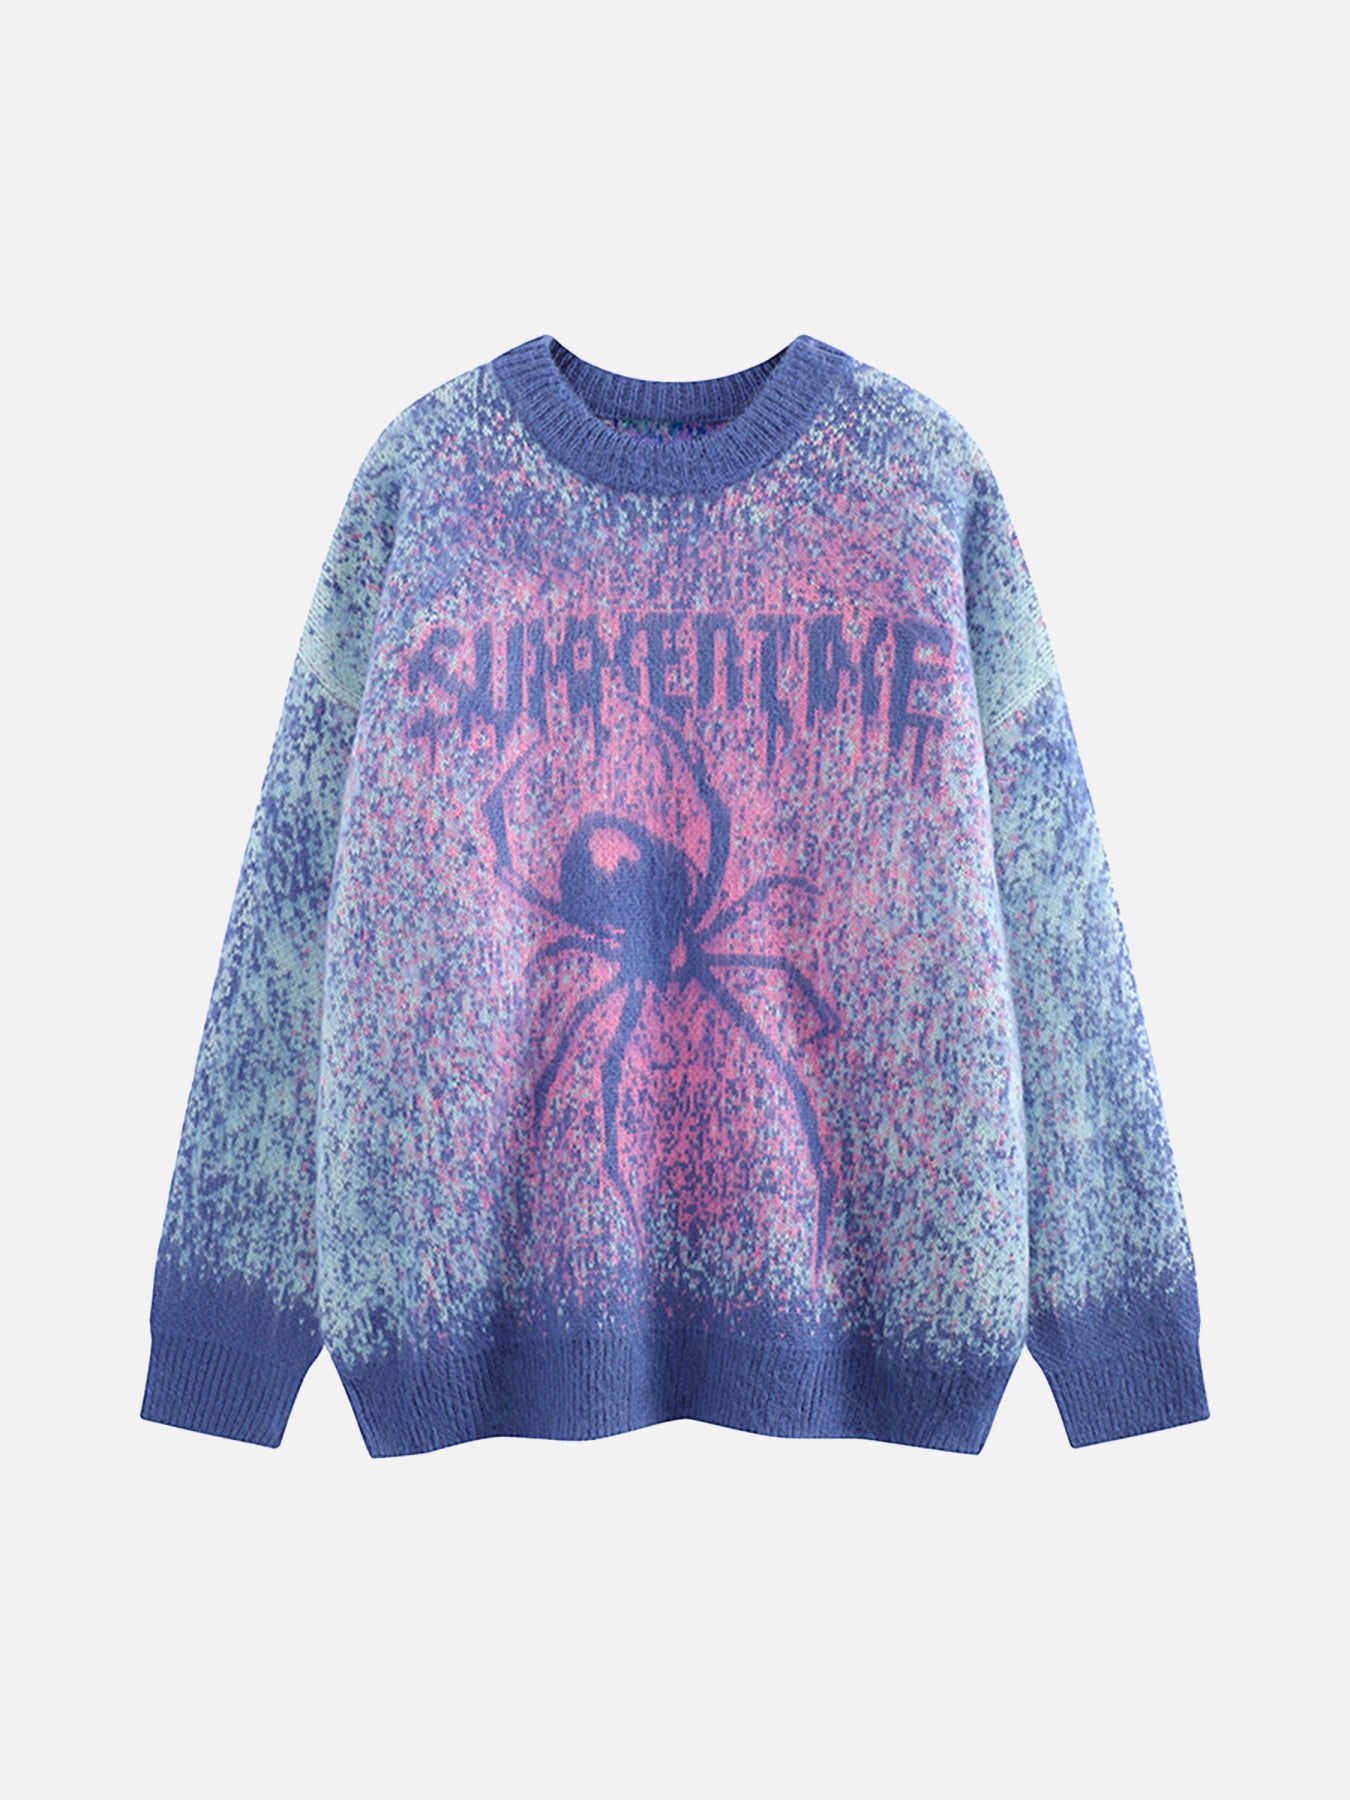 Thesupermade American Vintage Loose Sweater - 1835